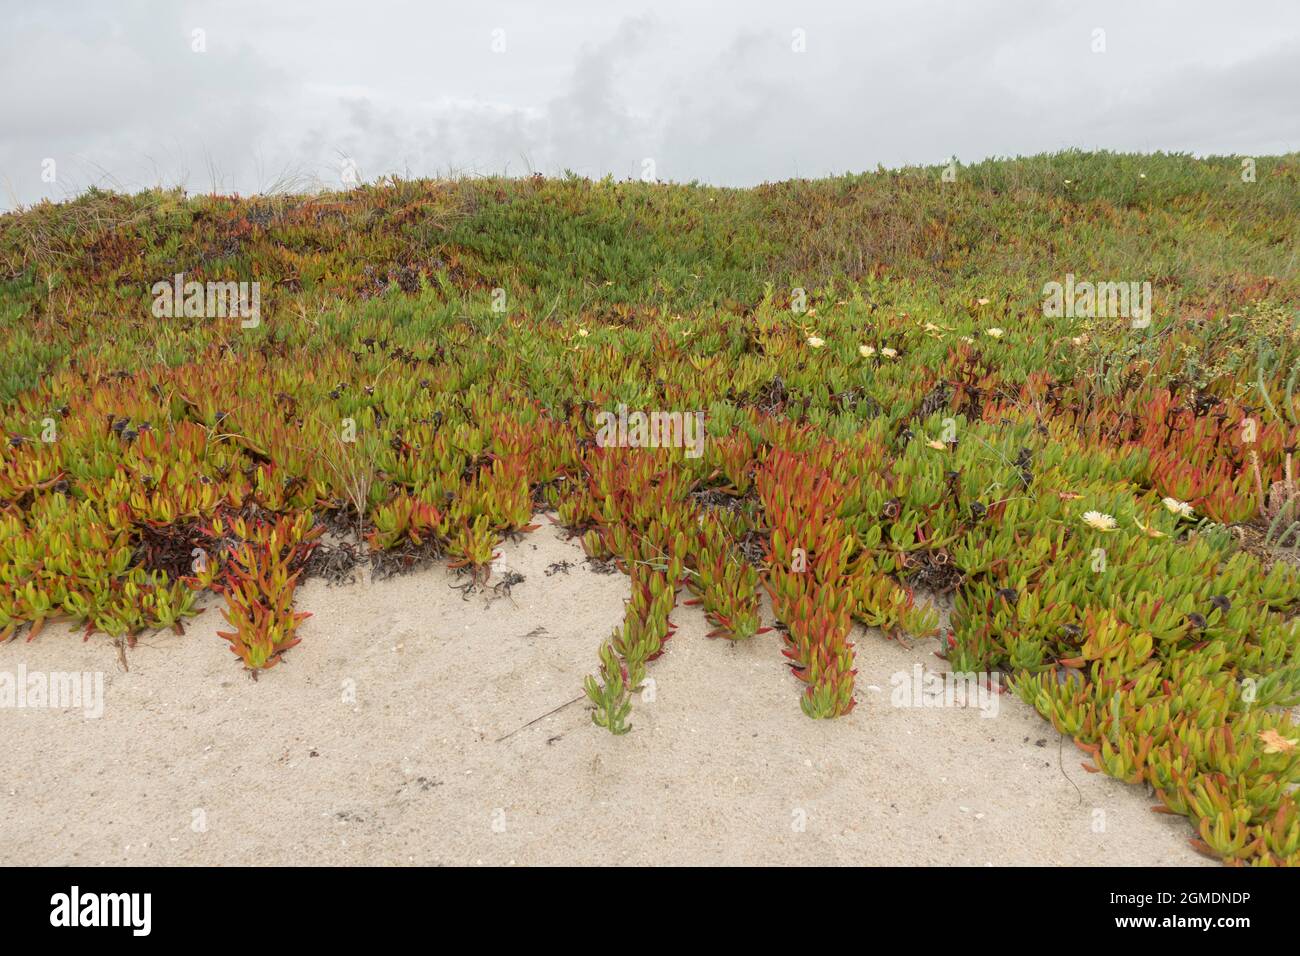 Ice plants, Carpobrotus edulis, growing on a beach covering the sand in Portugal. Stock Photo